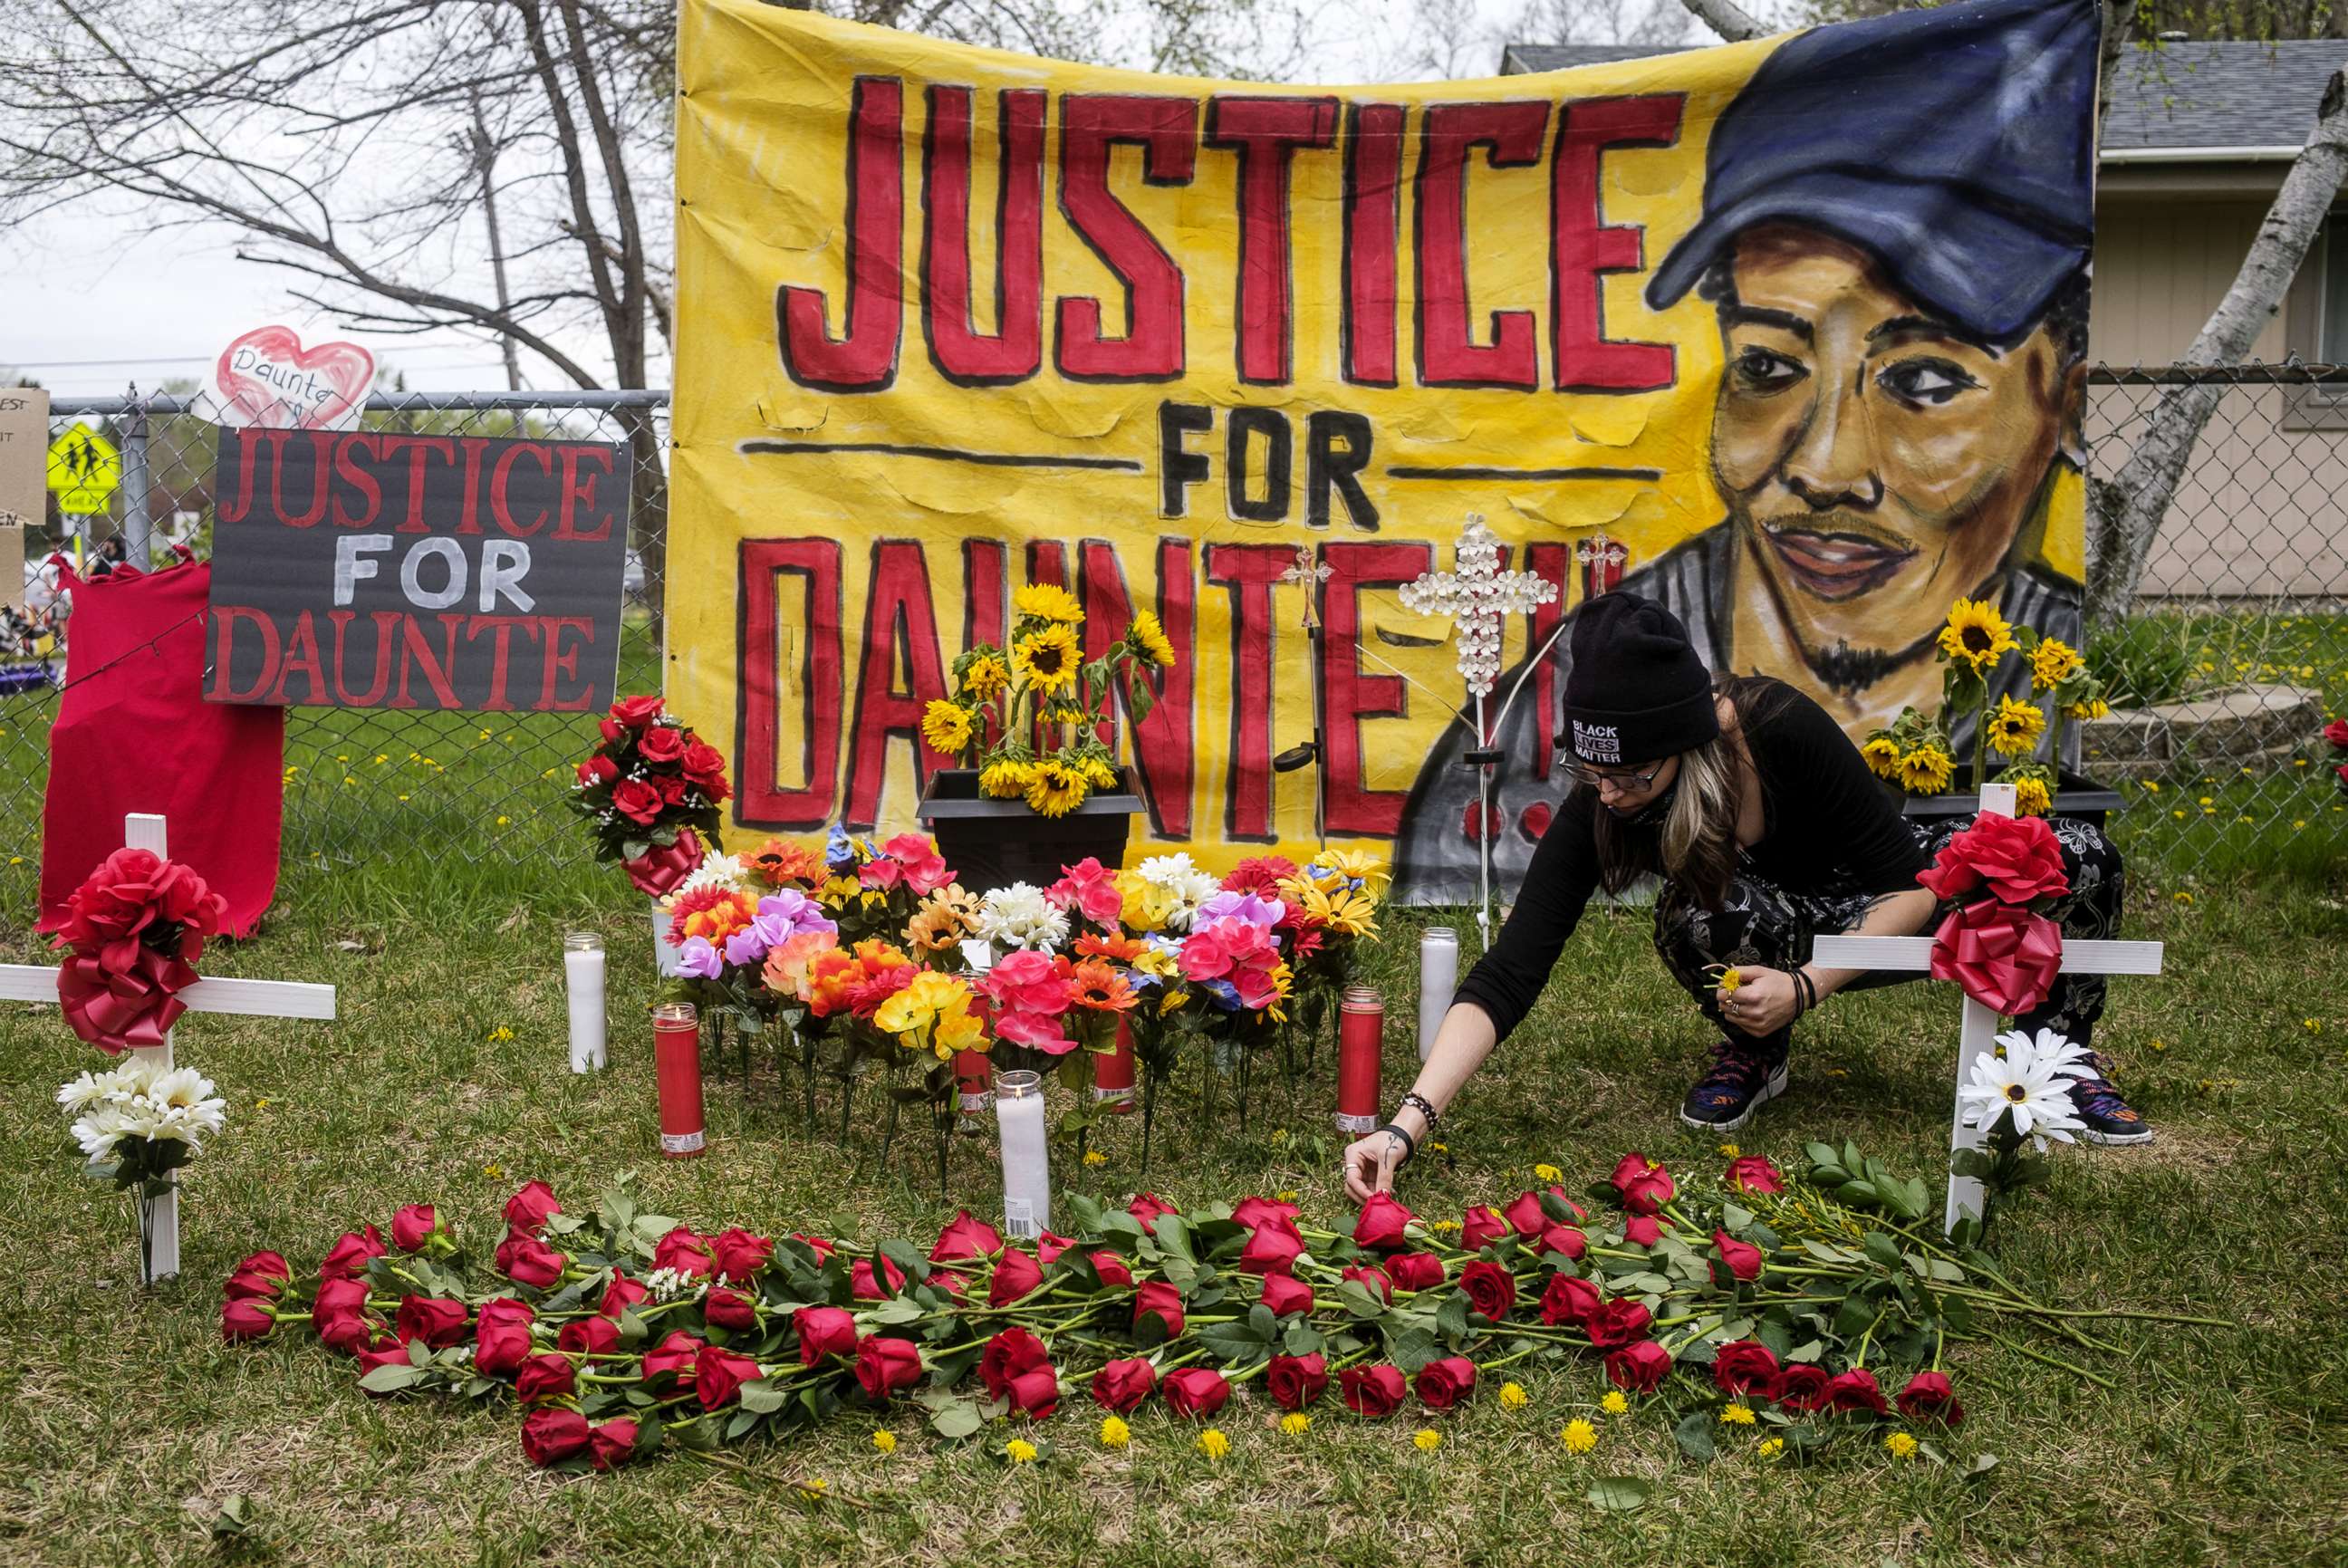 PHOTO: A person decorates a memorial for Daunte Wright with flowers and dandelions in Brooklyn Center, Minn., May 2, 2021.